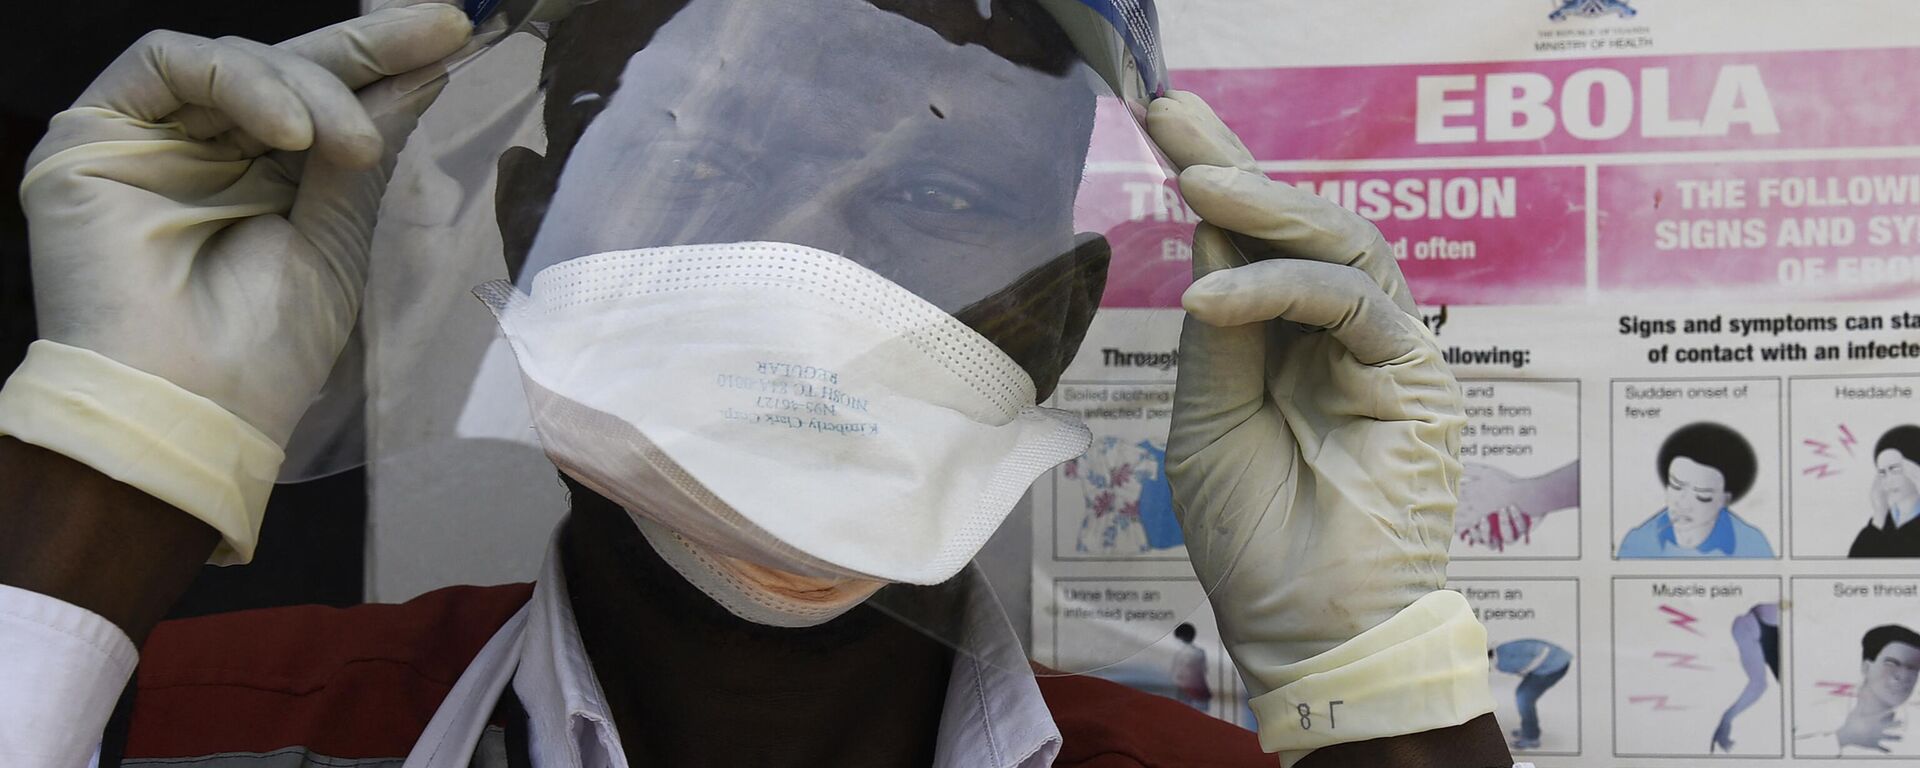 A health worker puts on protective gears as he prepares to screen travellers at the Mpondwe Health Screening Facility in the Uganda's border town of Mpondwe as they cross over from the Democratic Republic of Congo, on June 13, 2019. - Sputnik International, 1920, 22.09.2022